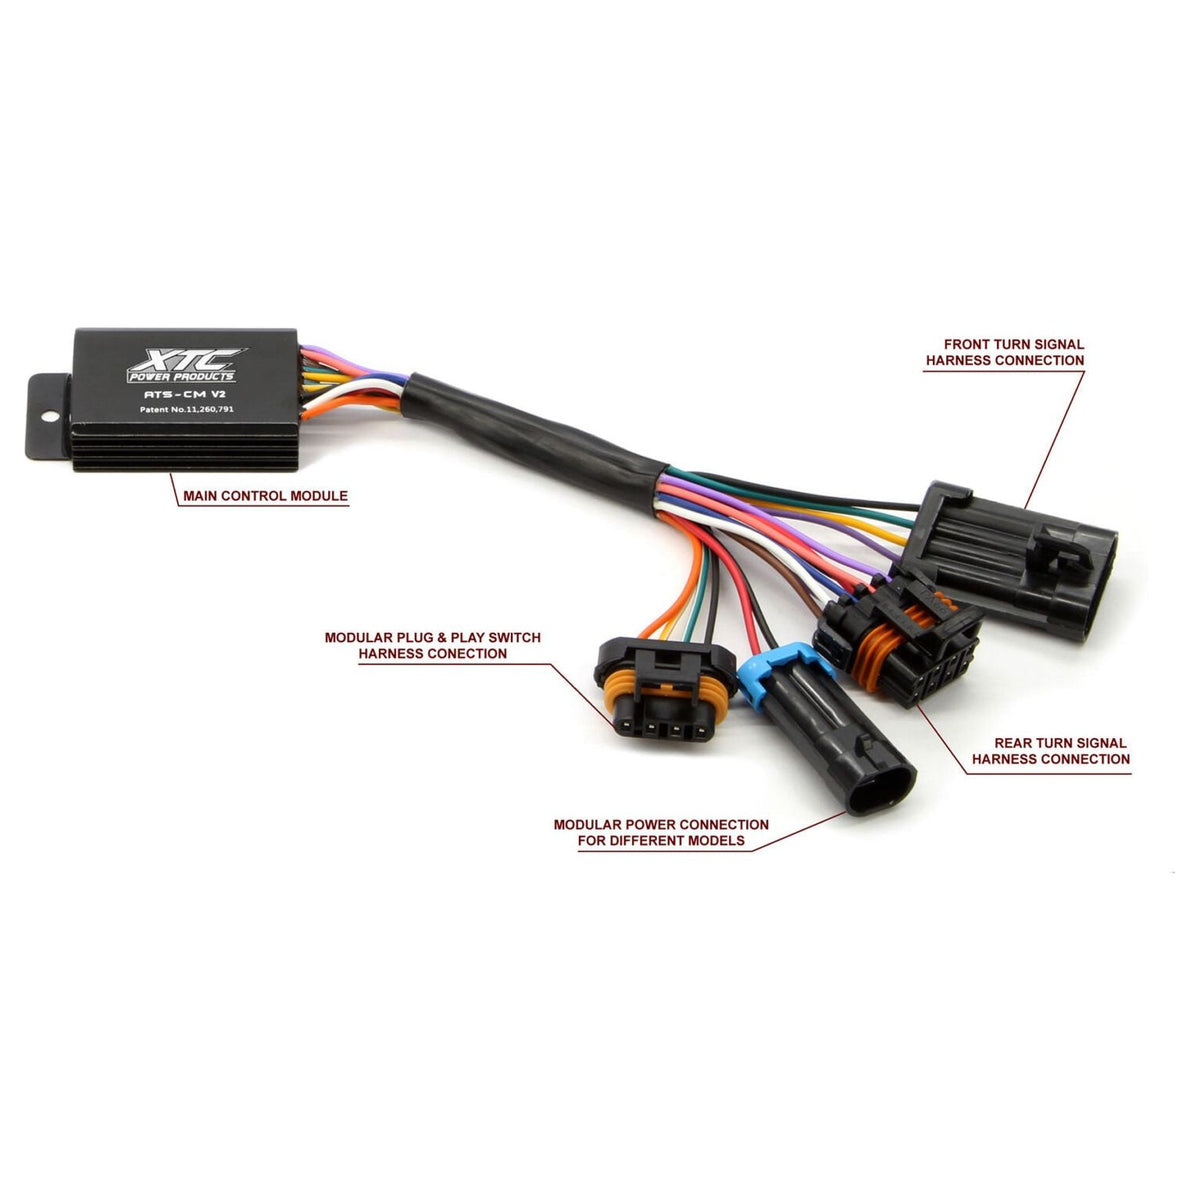 Can Am Maverick R Self-Canceling Turn Signal System with Horn | XTC Power Products